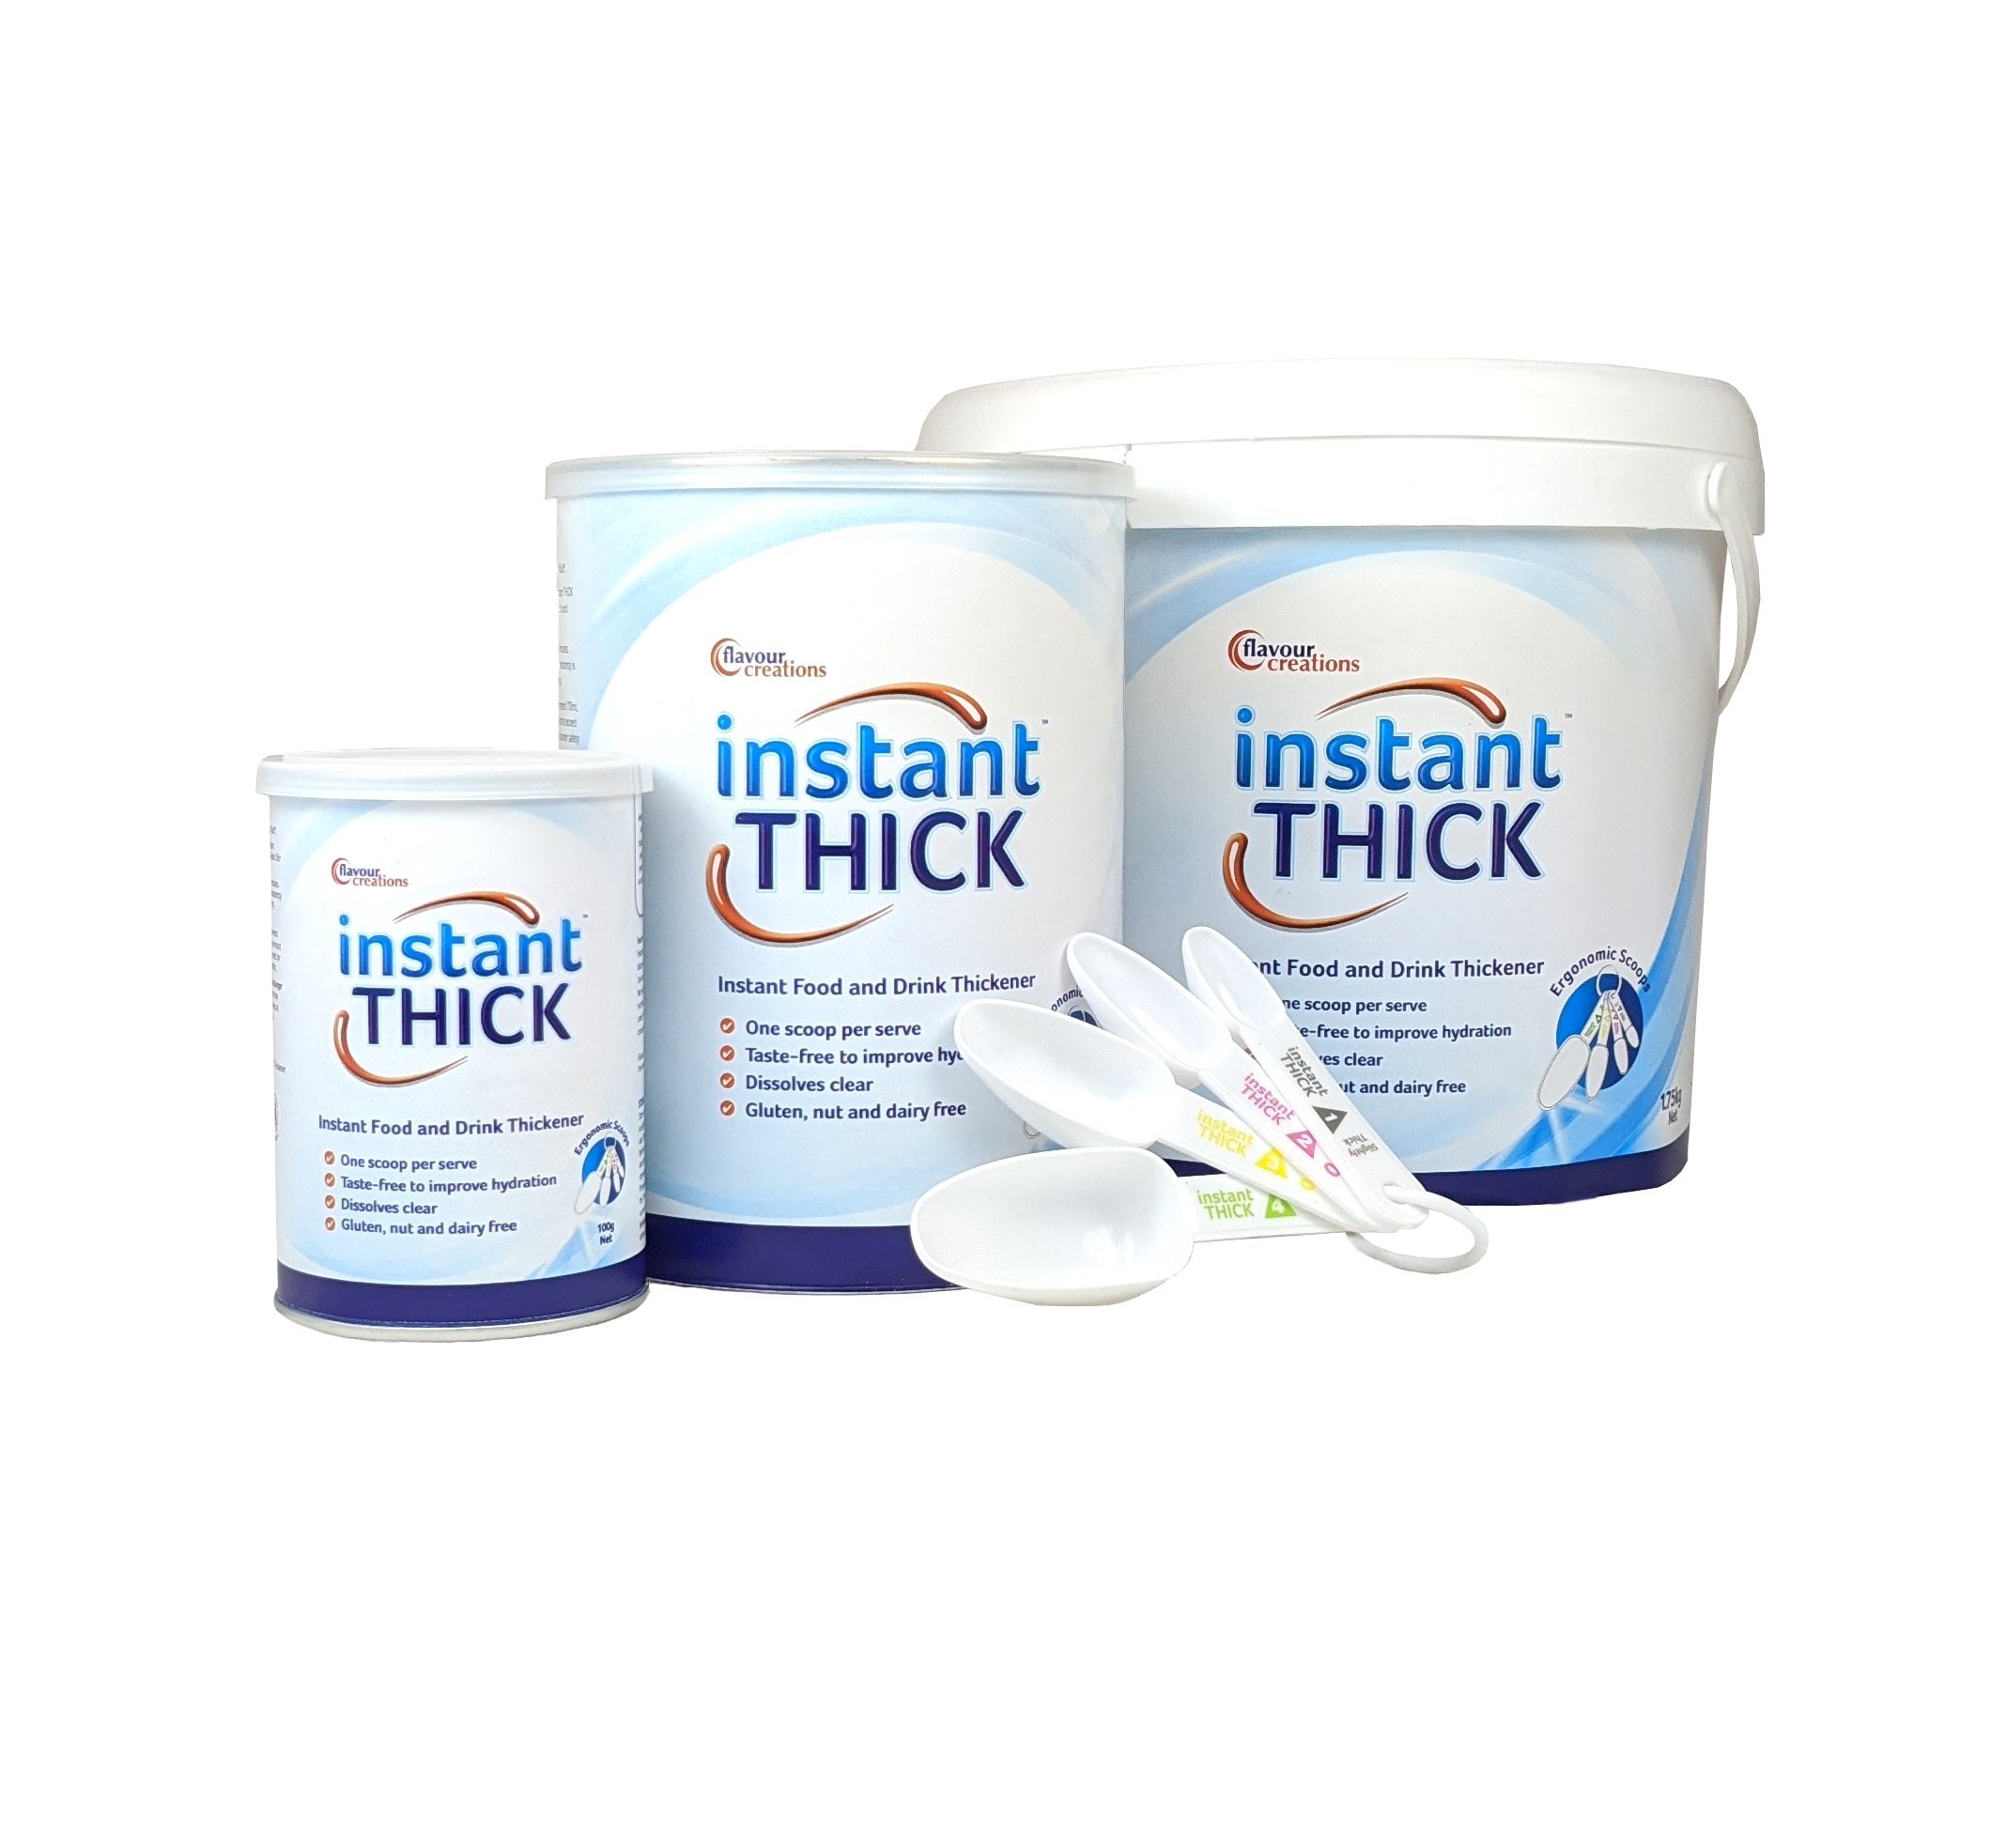 FLAVOUR CREATIONS INSTANT THICK 675G EACH